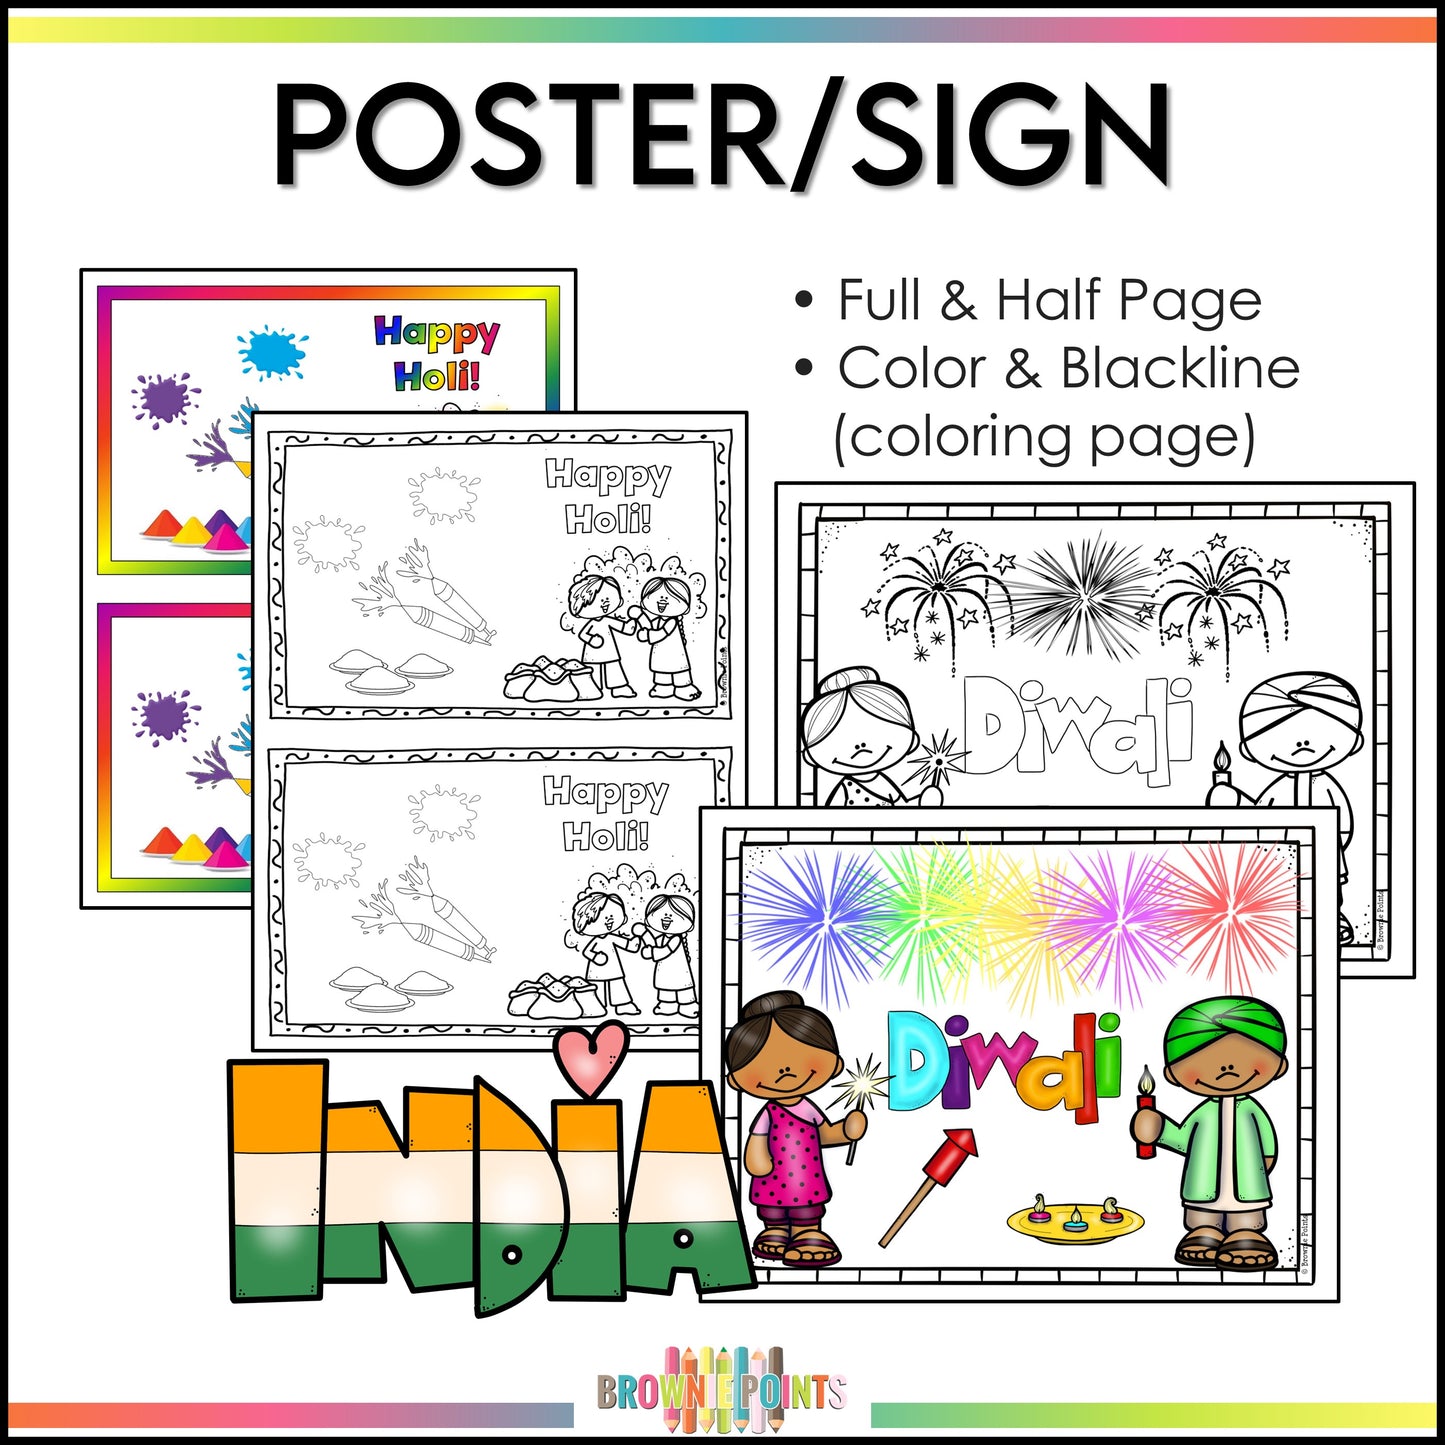 Indian Celebrations - Posters and Cards